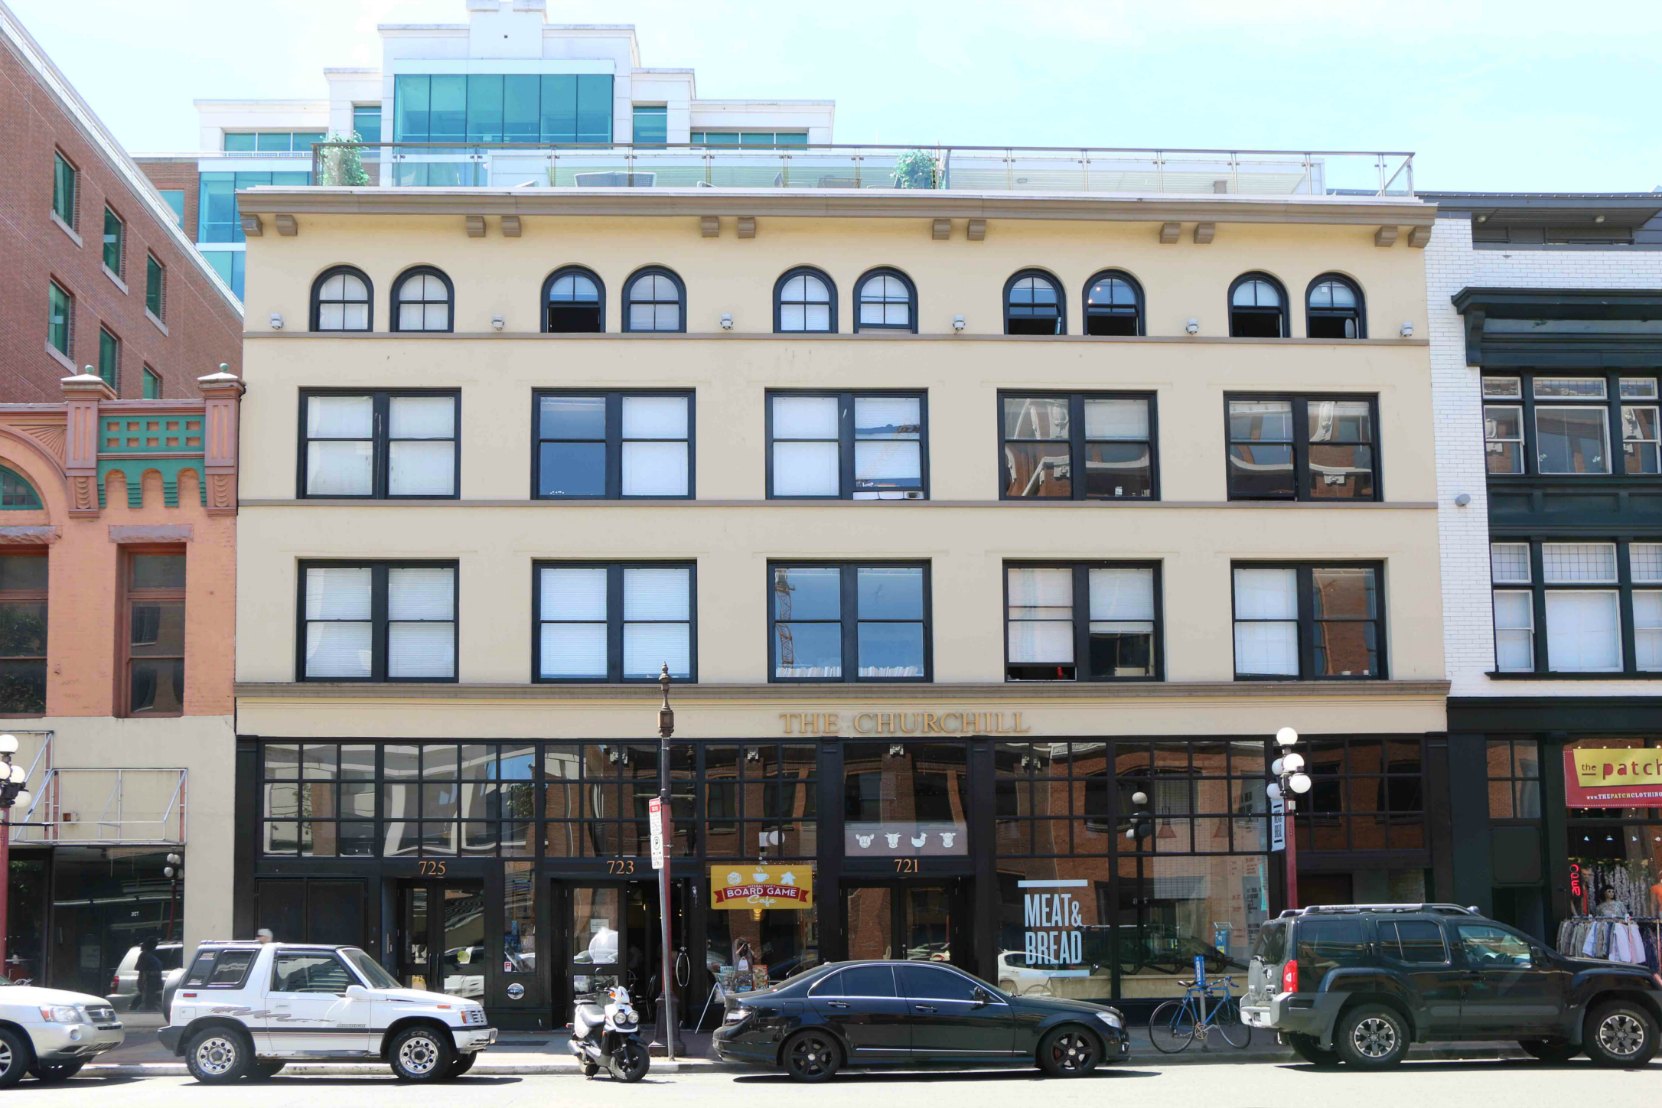 721-725 Yates Street, built in 1909 and opened as the Portland Hotel (photo: Victoria Online Sightseeing Tours)